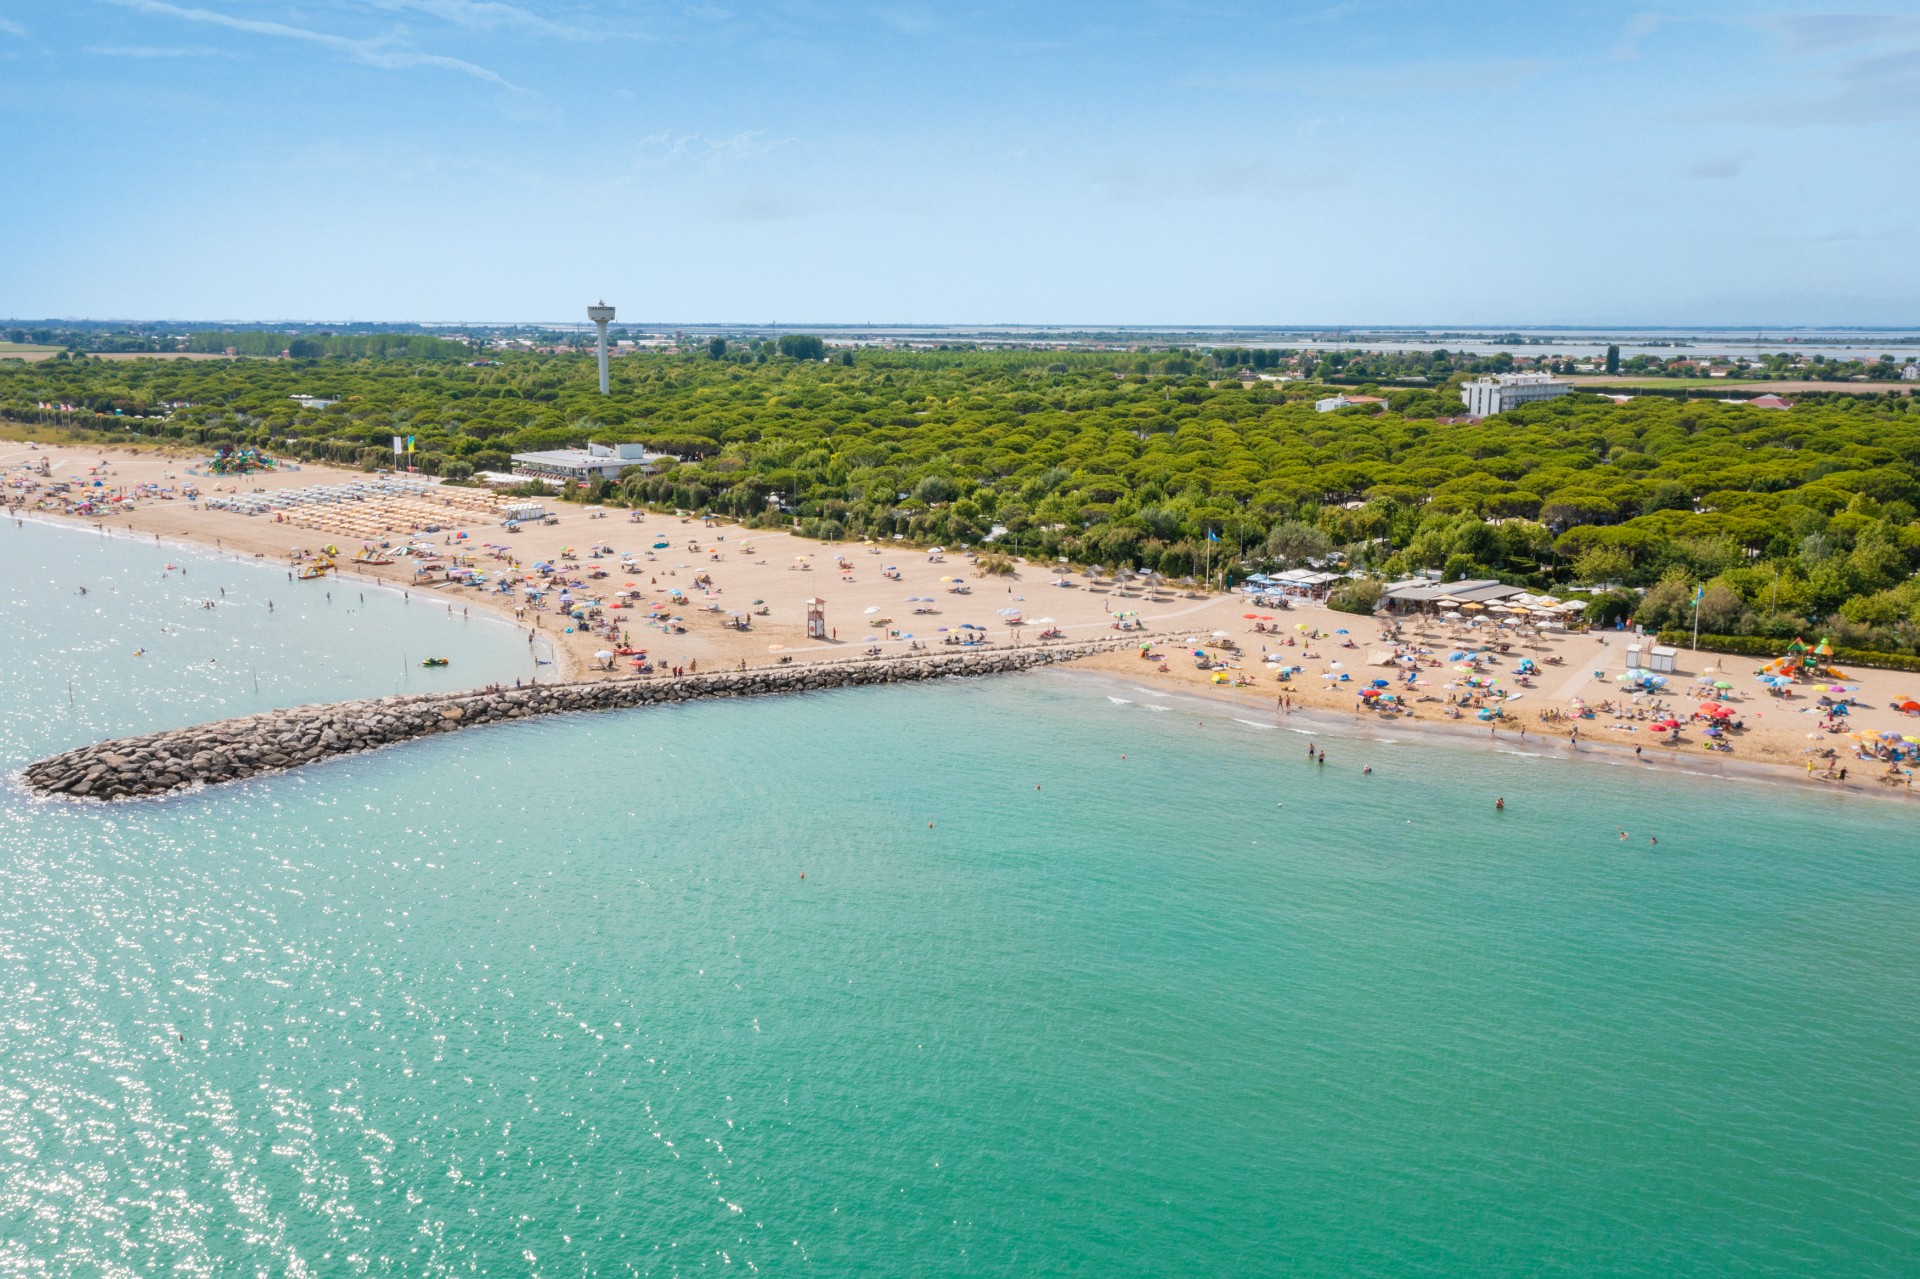 Campings located directly to the sea